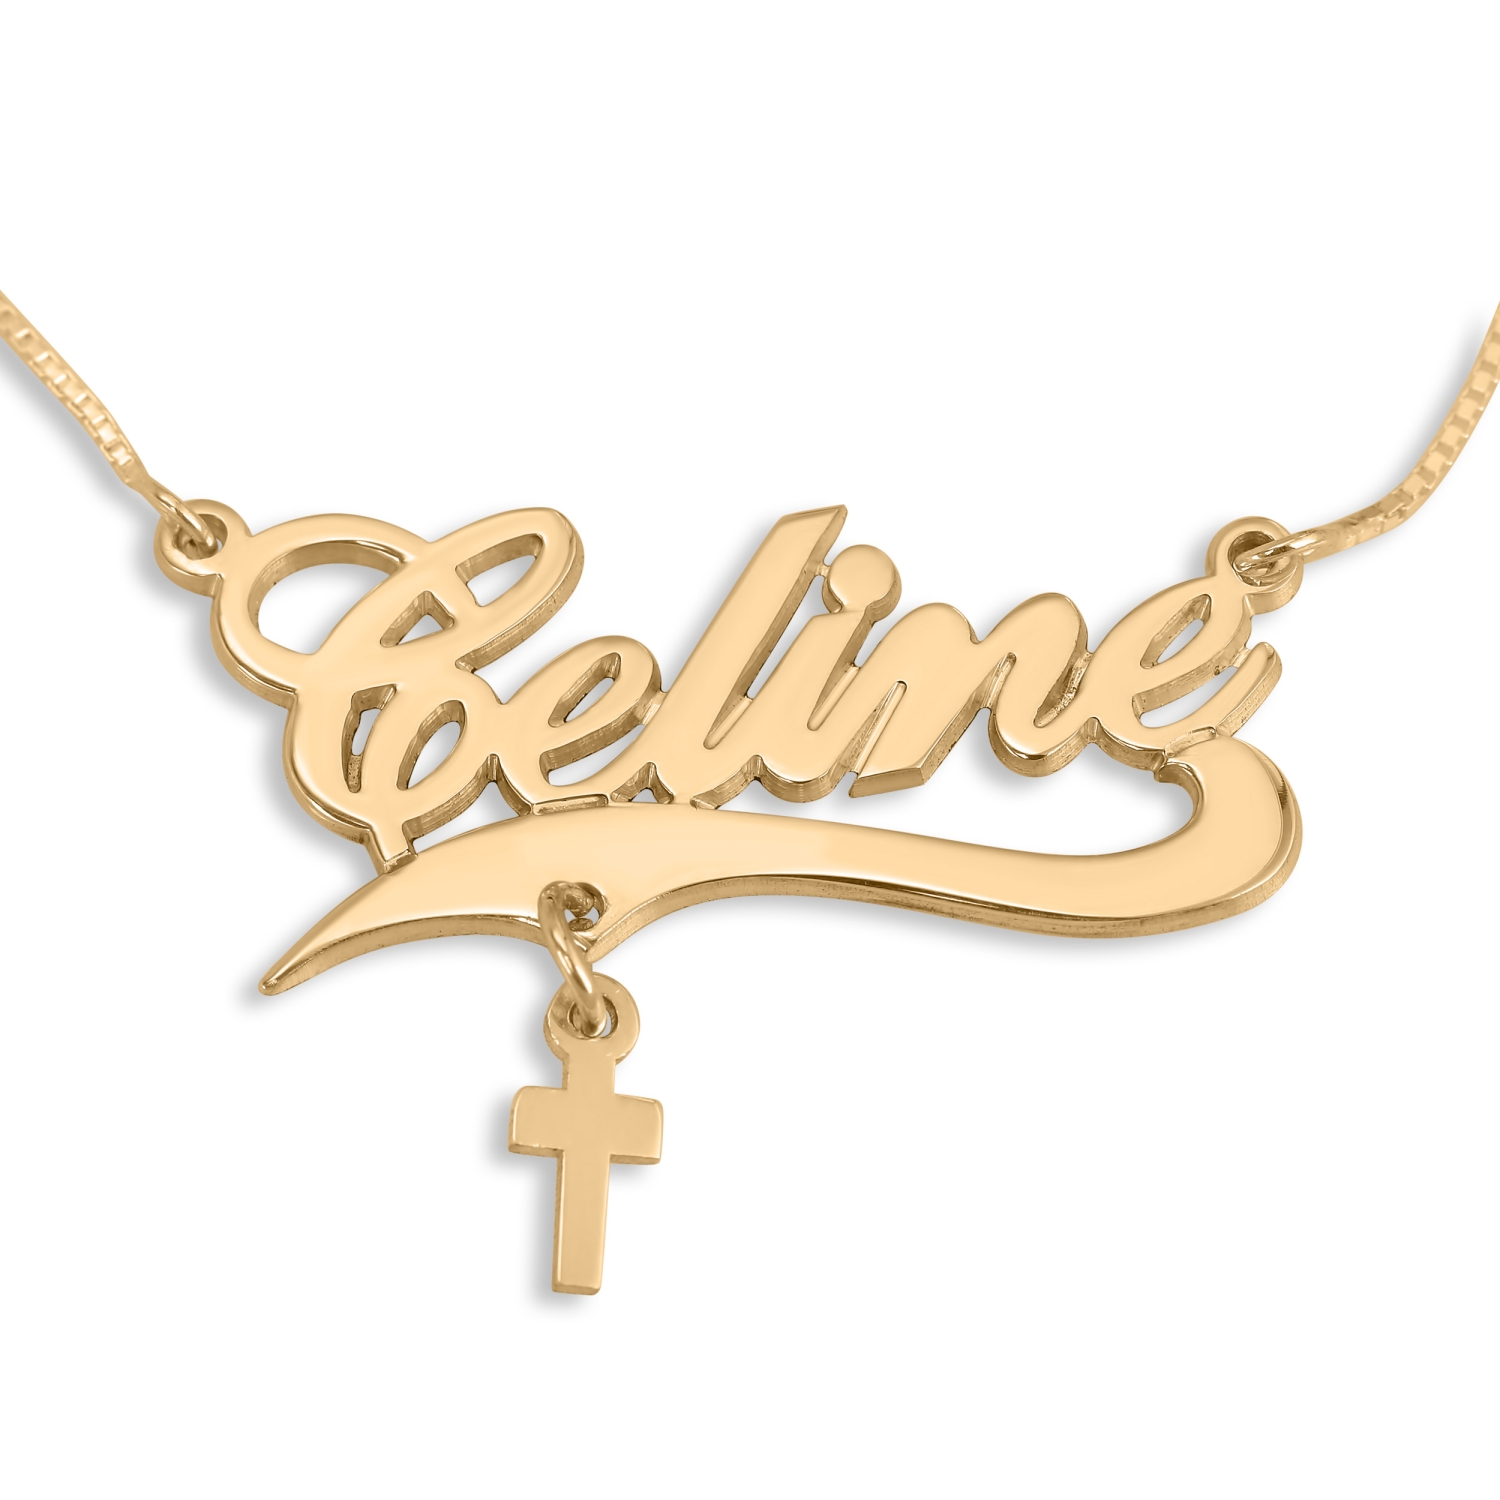 24K Gold Plated Personalized Name Necklace with Flourish and Choice of Charms - 4